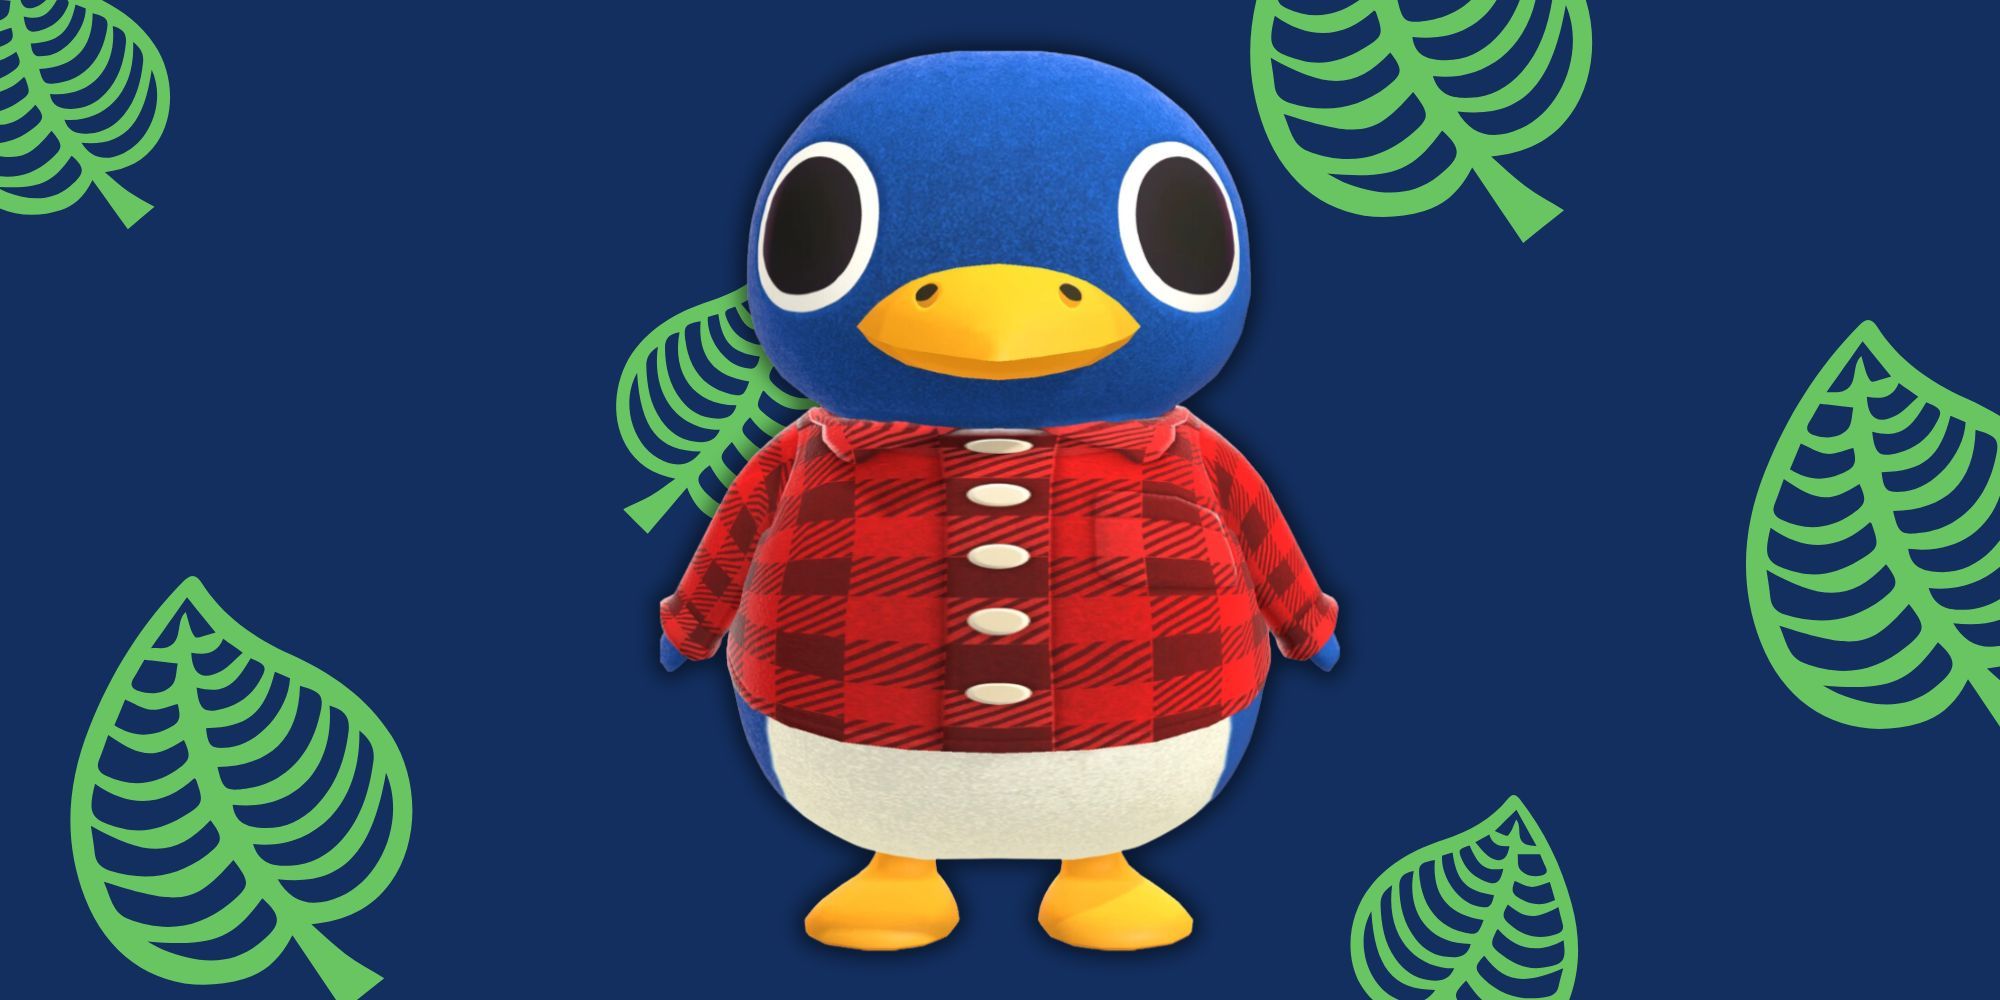 Roald from Animal Crossing in front of leaf-patterned backdrop